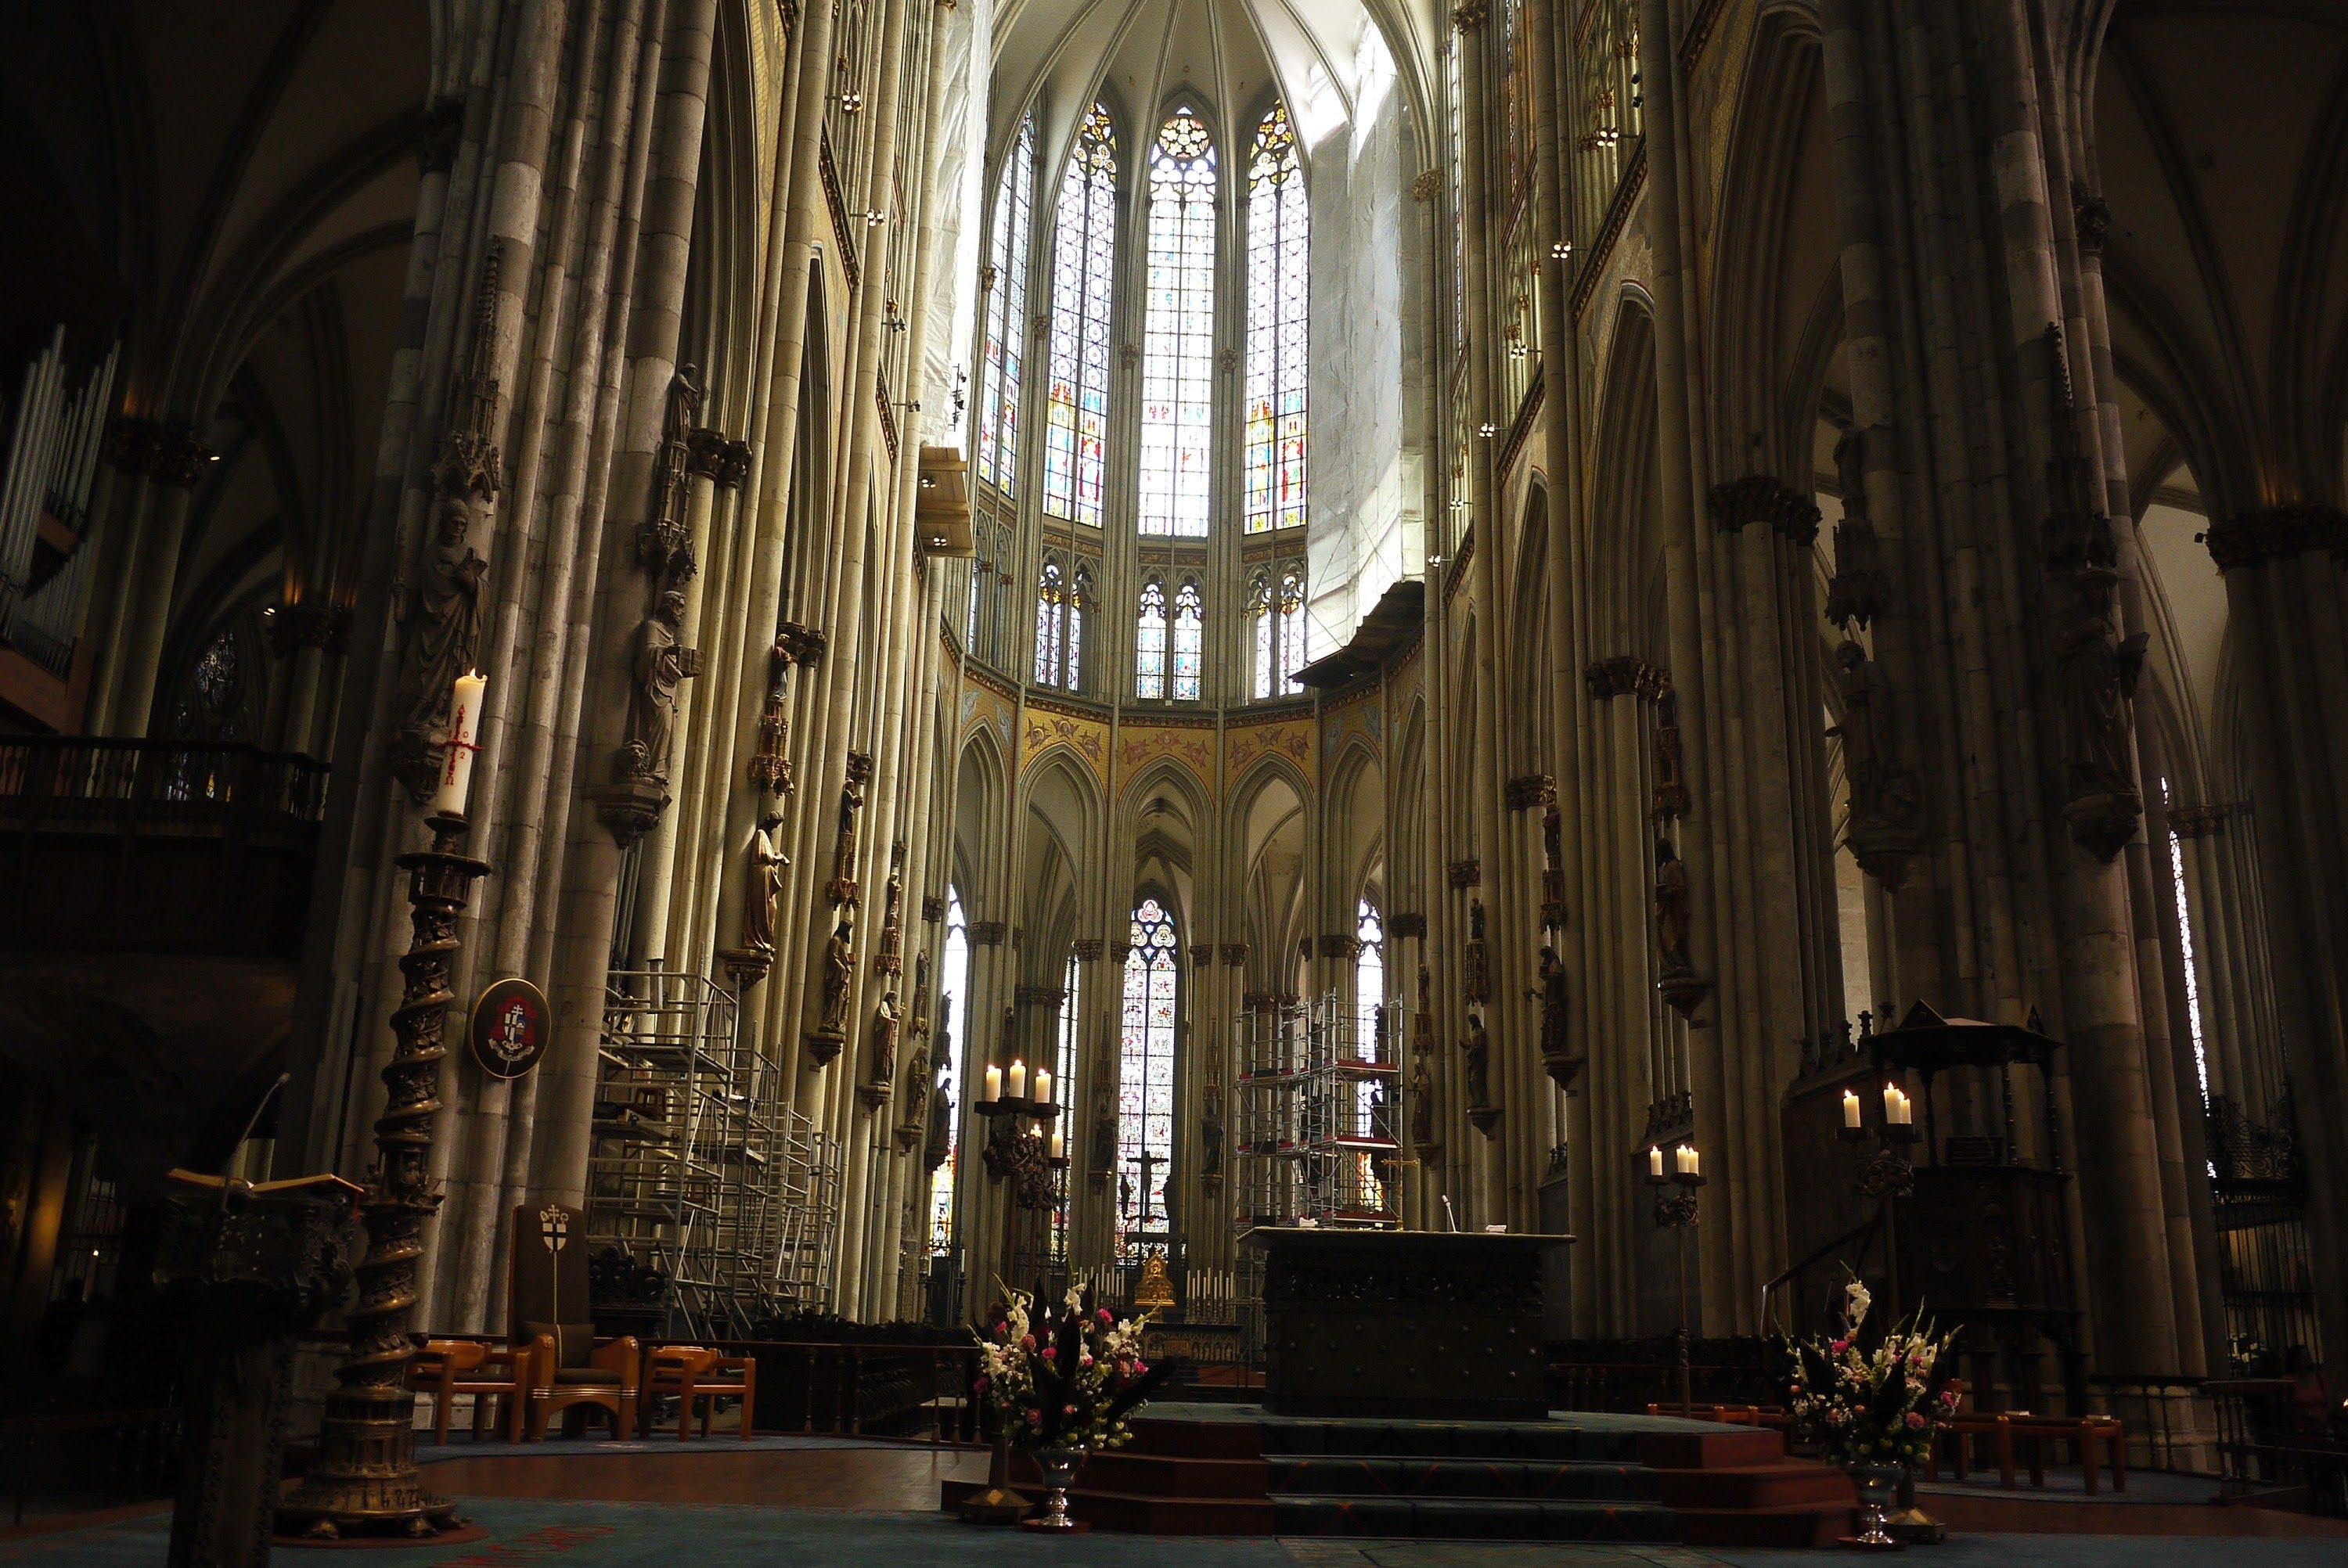 Cologne Cathedral Interior Tour - YouTube